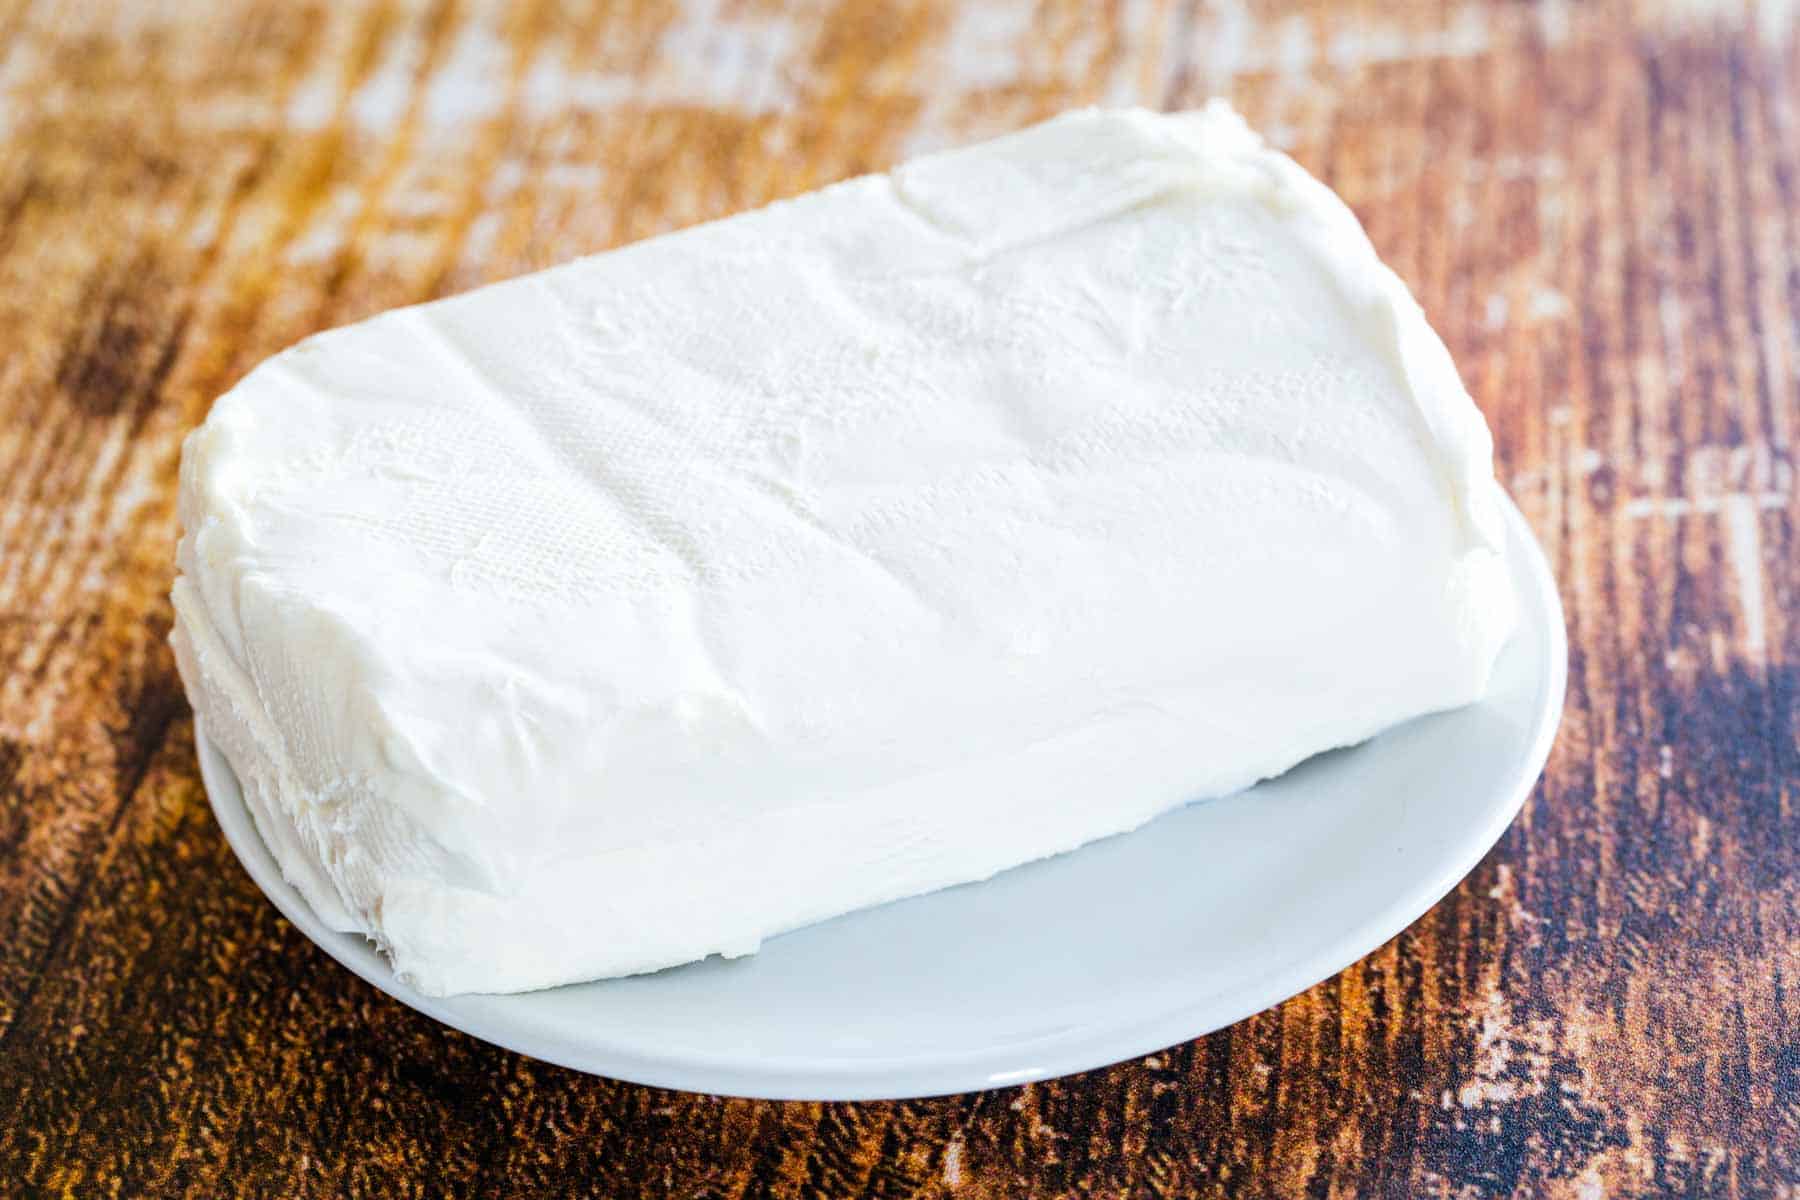 A bar of cream cheese on a small white plate.